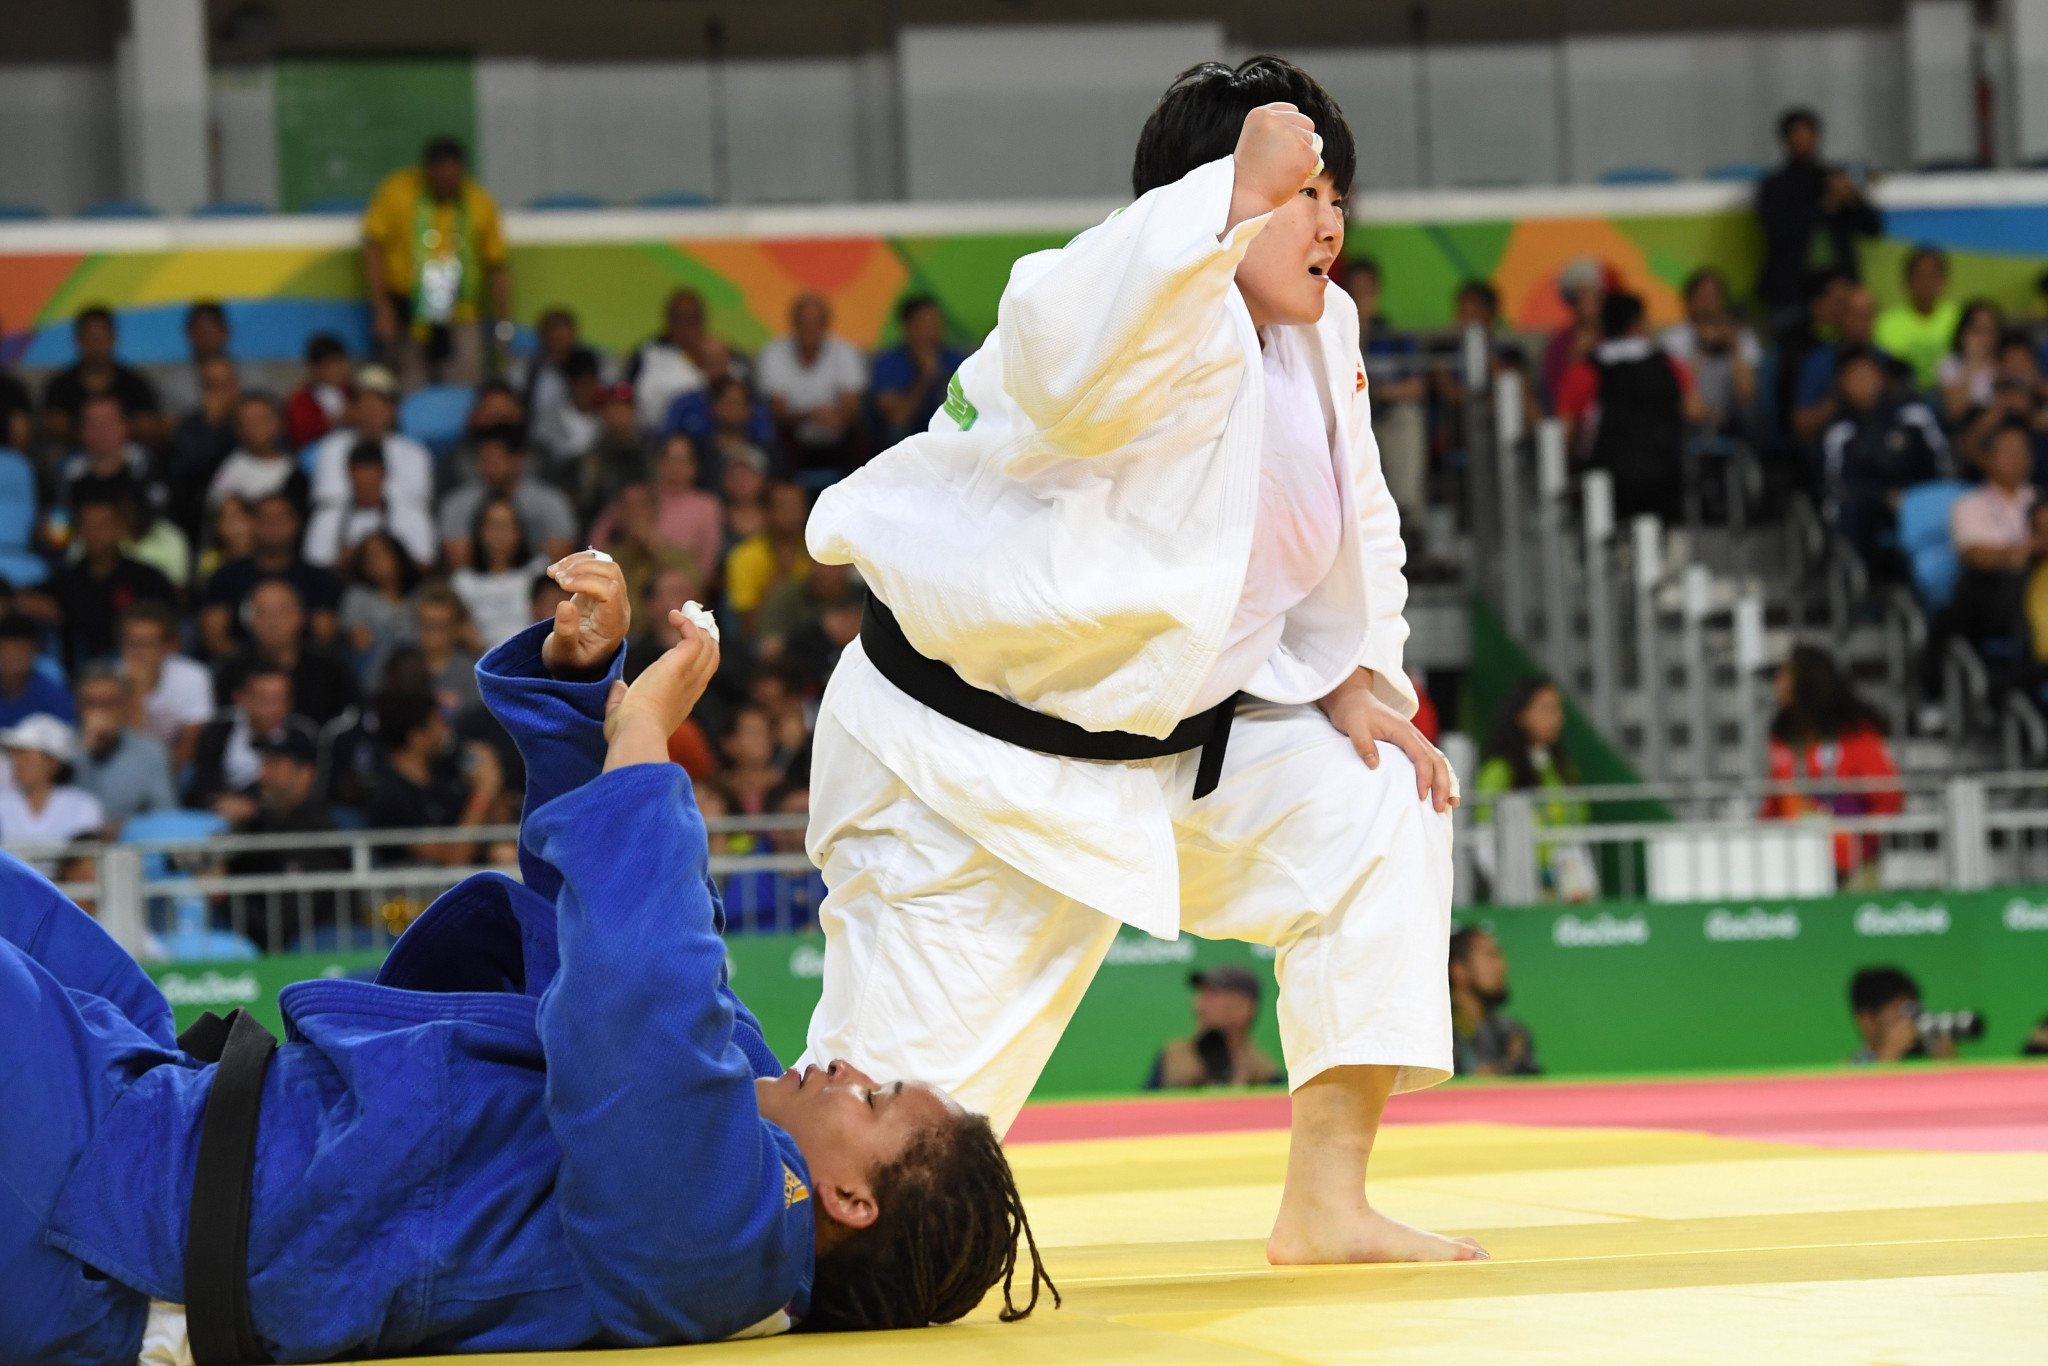 The news is seen as a boost to Chinese judo ©Getty Images